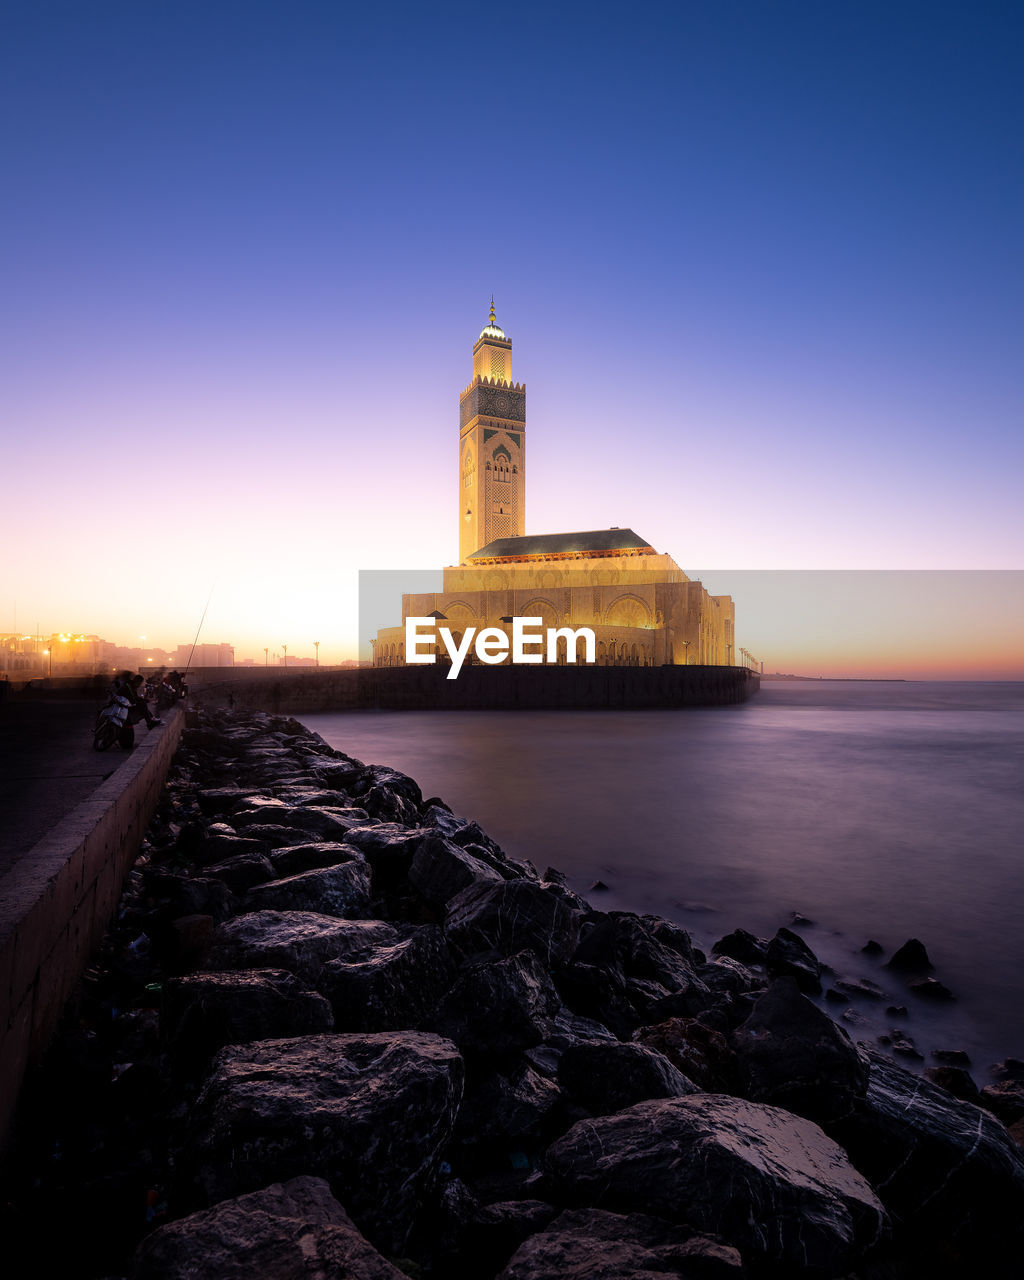 The hassan ii mosque is a mosque in casablanca, morocco.